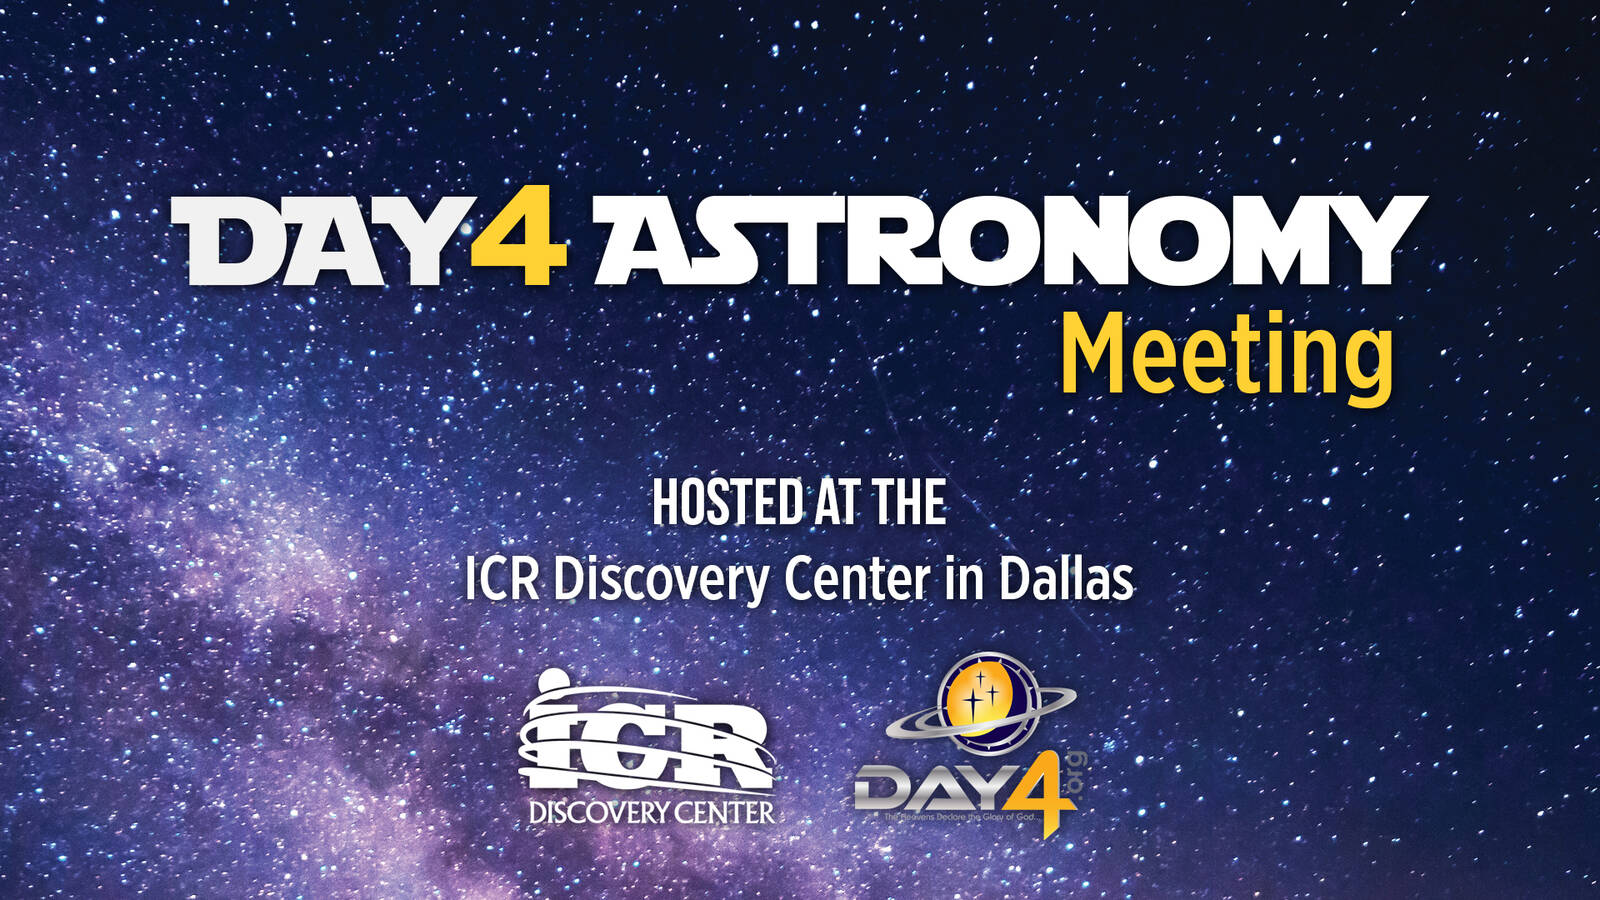 Day 4 Astronomy Club Meeting - hosted at the ICR Discovery Center